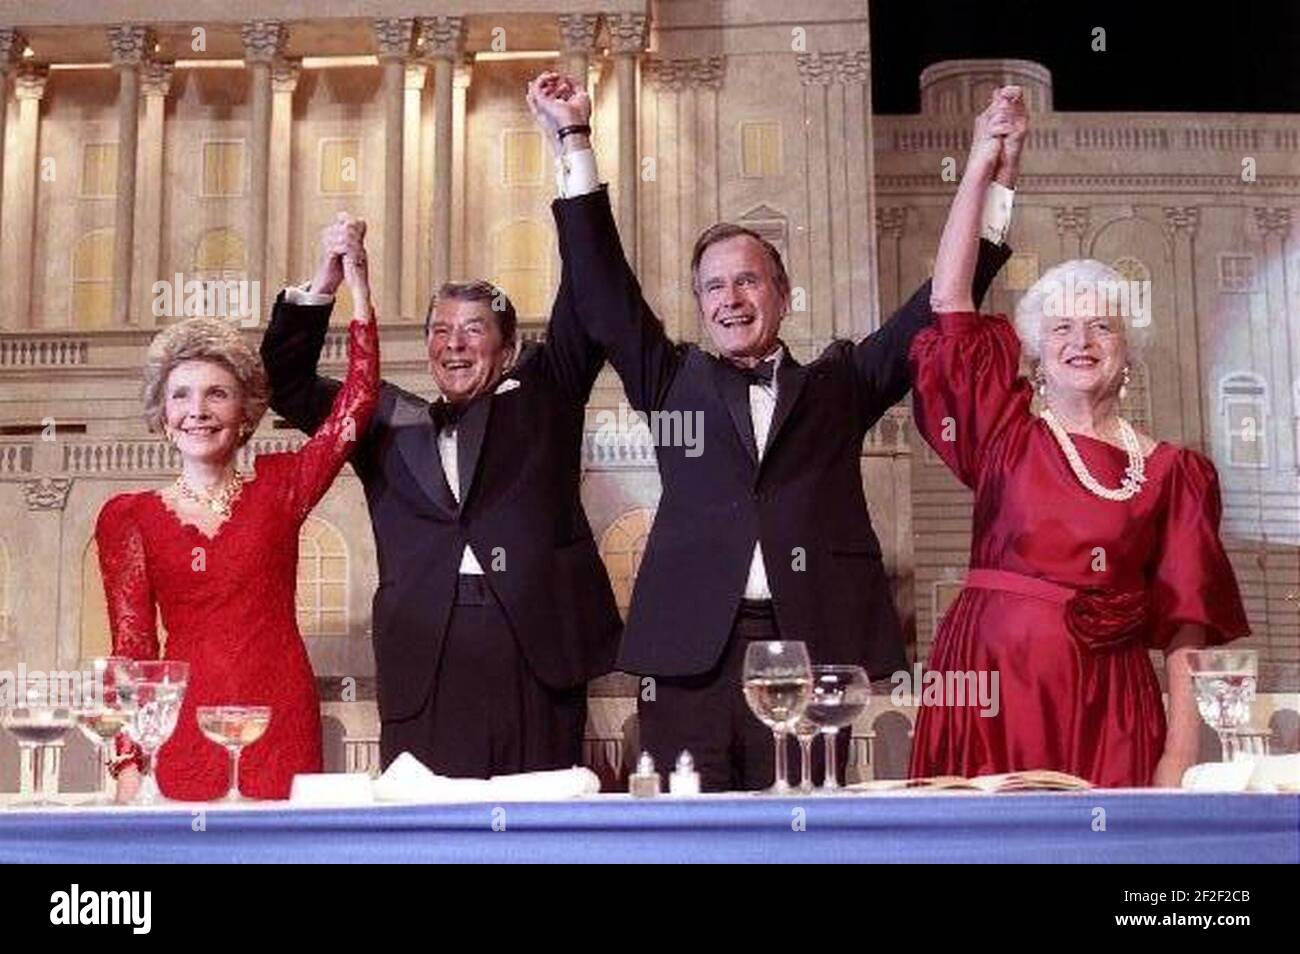 President Ronald Reagan and Vice President George Bush, accompanied by wives Nancy and Barbara, join hands after the President endorses Bushes run for the Presidency during the President's dinner, Washington, DC. Stock Photo